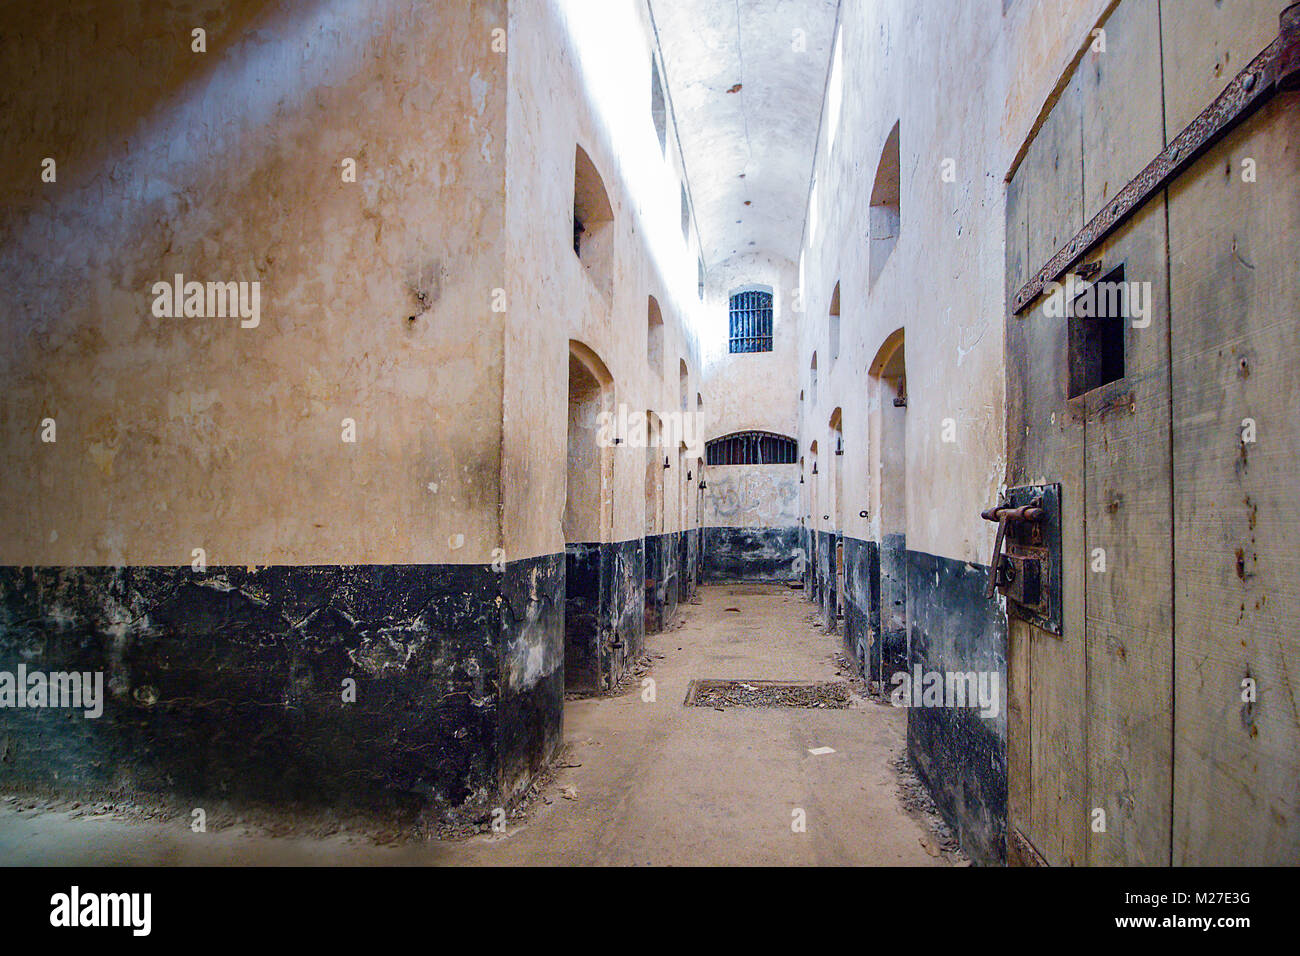 Isolation cells inside a penal colony at Ile Royale, one of the islands of Iles du Salut (Islands of Salvation) in French Guiana. These islands were p Stock Photo